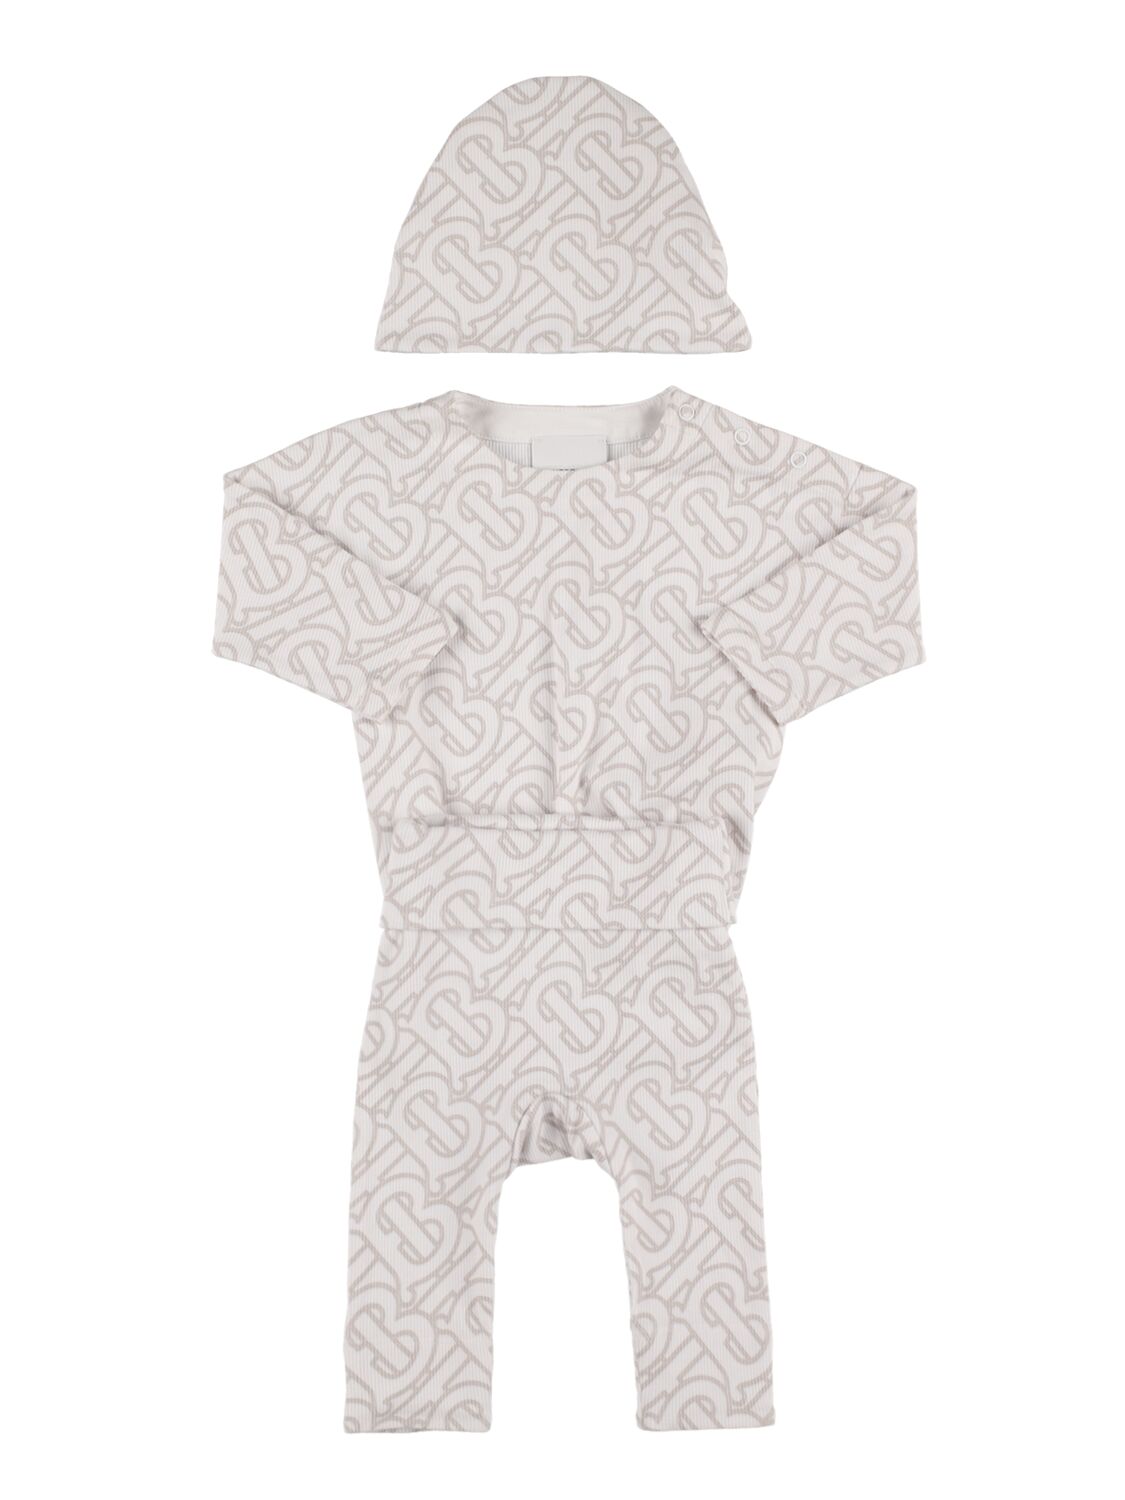 Burberry Babies' Cotton Blend Bodysuit, Trousers And Hat In White